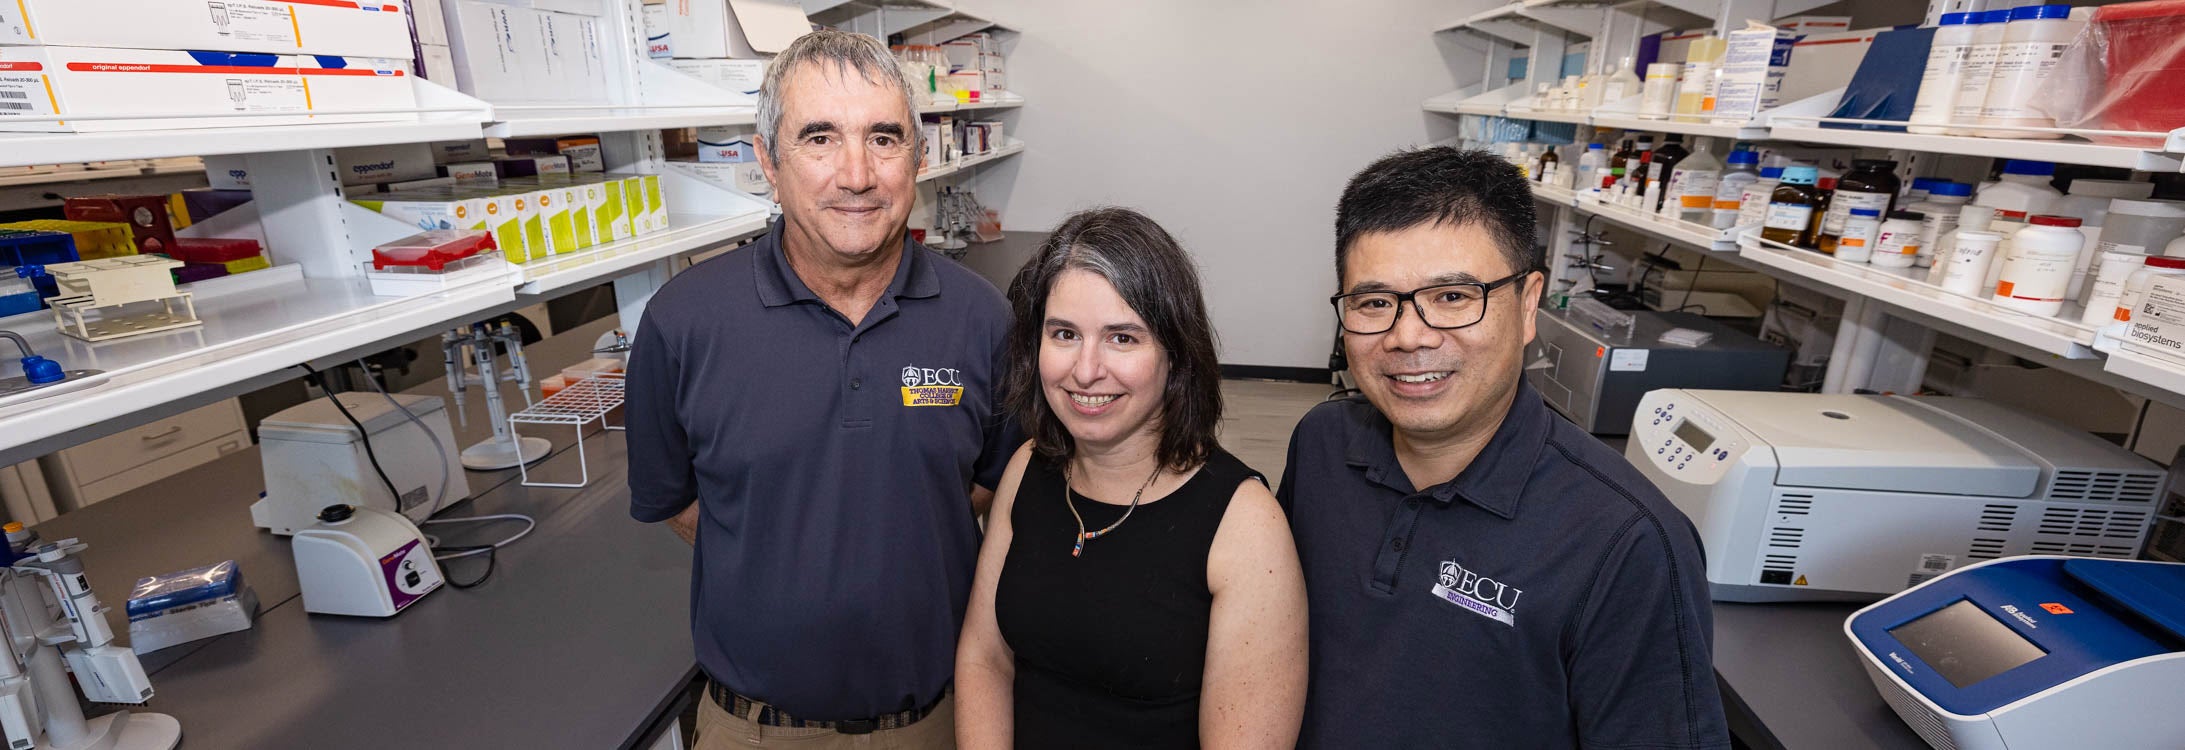 Dr. Jean-Luc Scemama, associate professor of biology; Dr. Heather Vance-Chalcraft, assistant professor of biology; and Dr. Jason Yao, professor of engineering are part of an East Carolina University team receiving $1 million of a multi-university grant to support students from underrepresented backgrounds in science, technology, engineering and math.